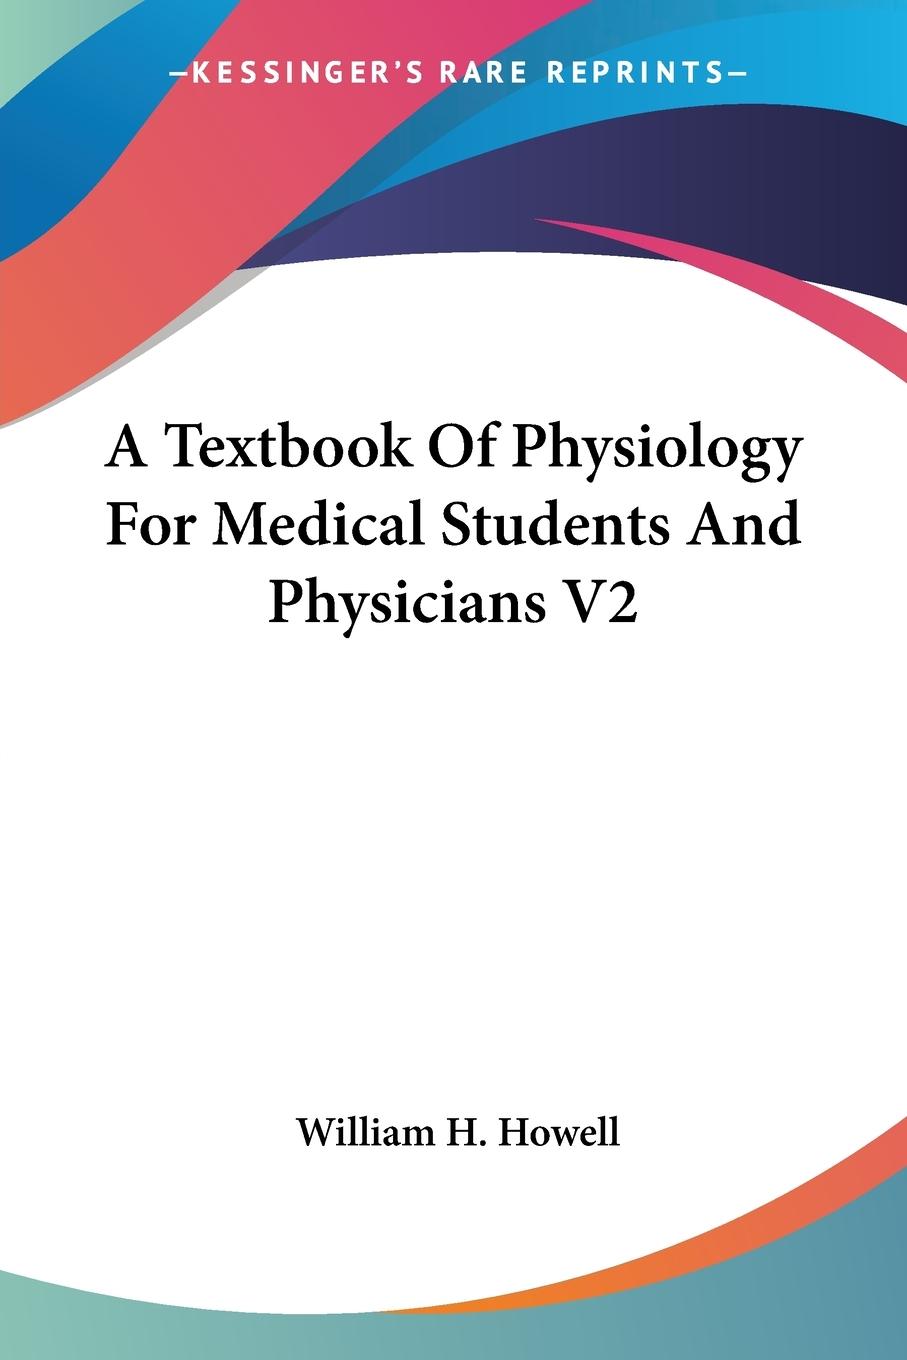 A Textbook Of Physiology For Medical Students And Physicians V2 - Howell, William H.